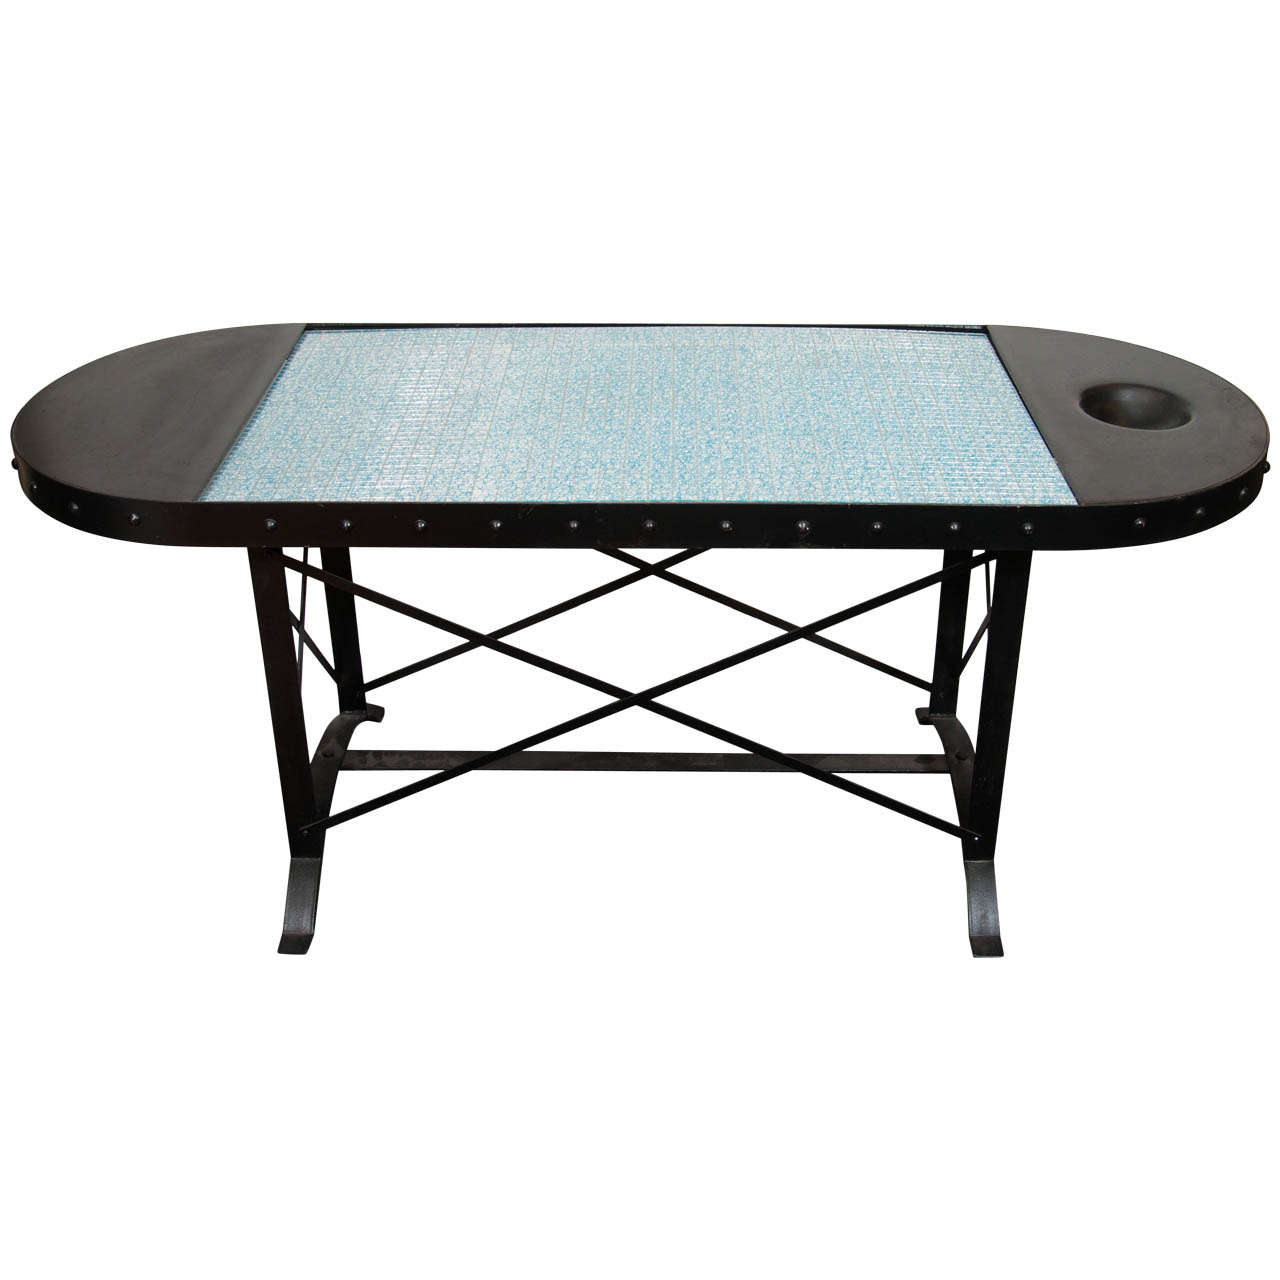 A Mid Century Iron Table with Blue Glass Top